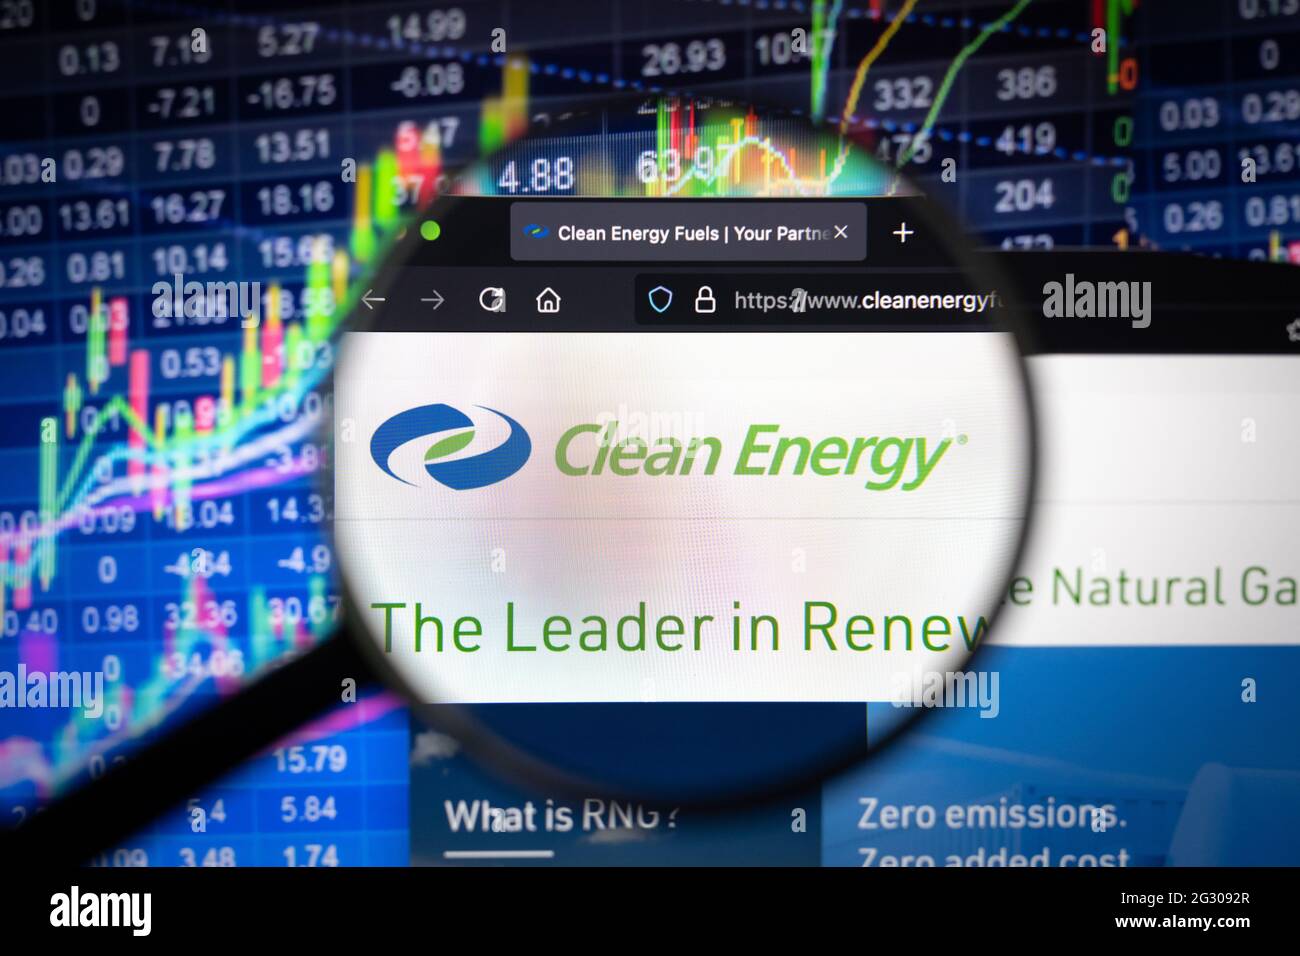 Clean Energy Fuels company logo on a website with blurry stock market developments in the background, seen on a computer screen Stock Photo